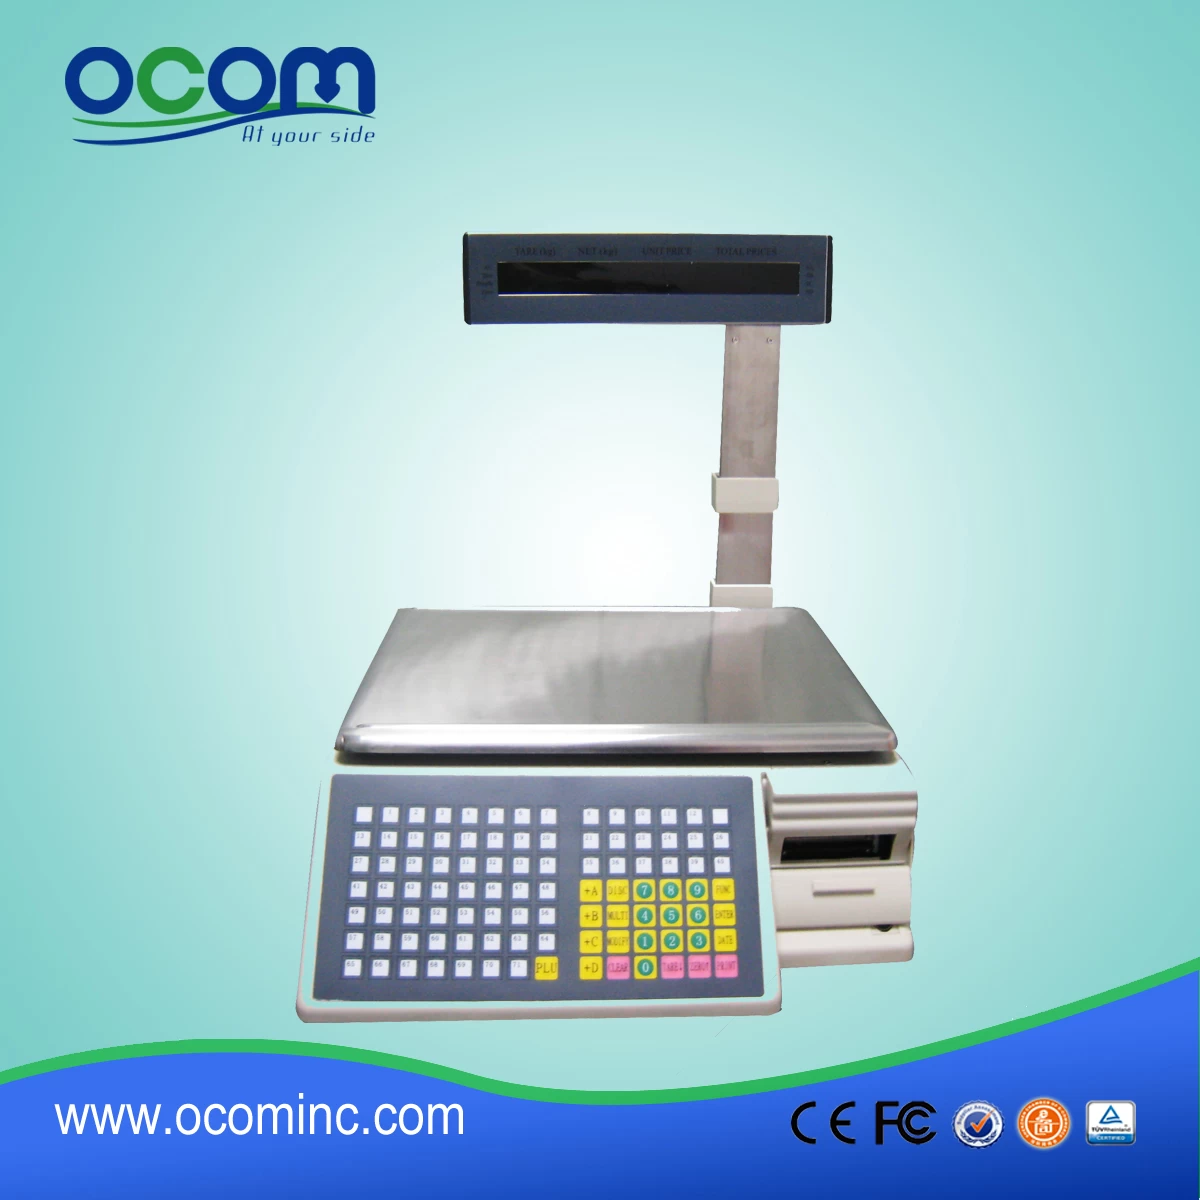 TM-AA-5D Weighing bar code electronic scale with label printer